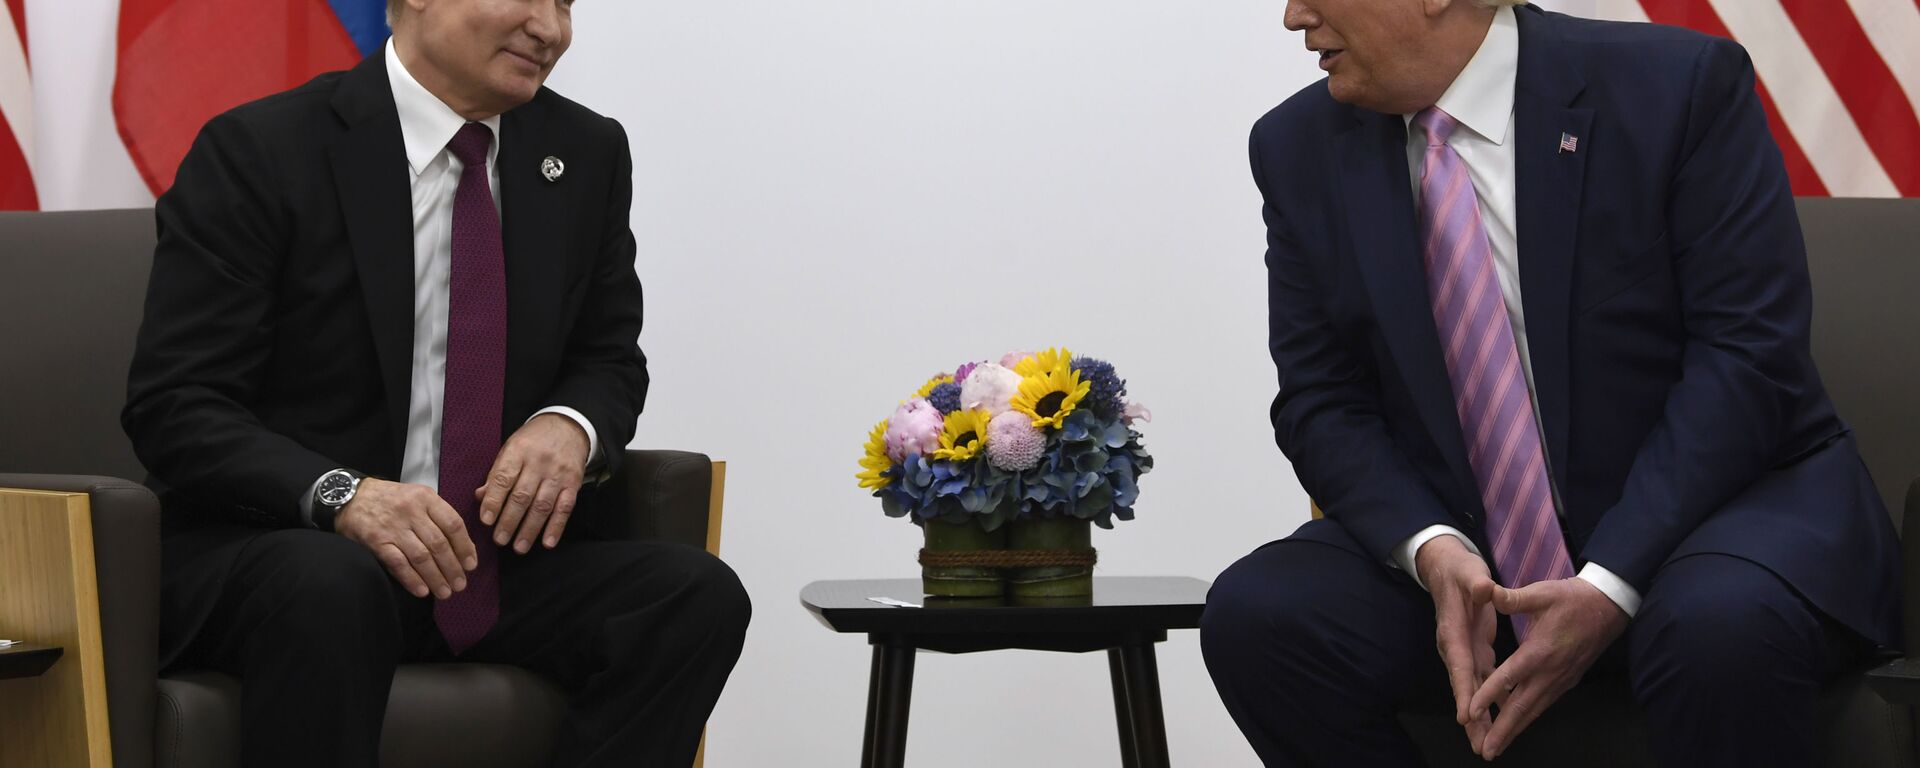  In this June 28, 2019, file photo, President Donald Trump, right, meets with Russian President Vladimir Putin during a bilateral meeting on the sidelines of the G-20 summit in Osaka, Japan. - Sputnik International, 1920, 05.04.2024